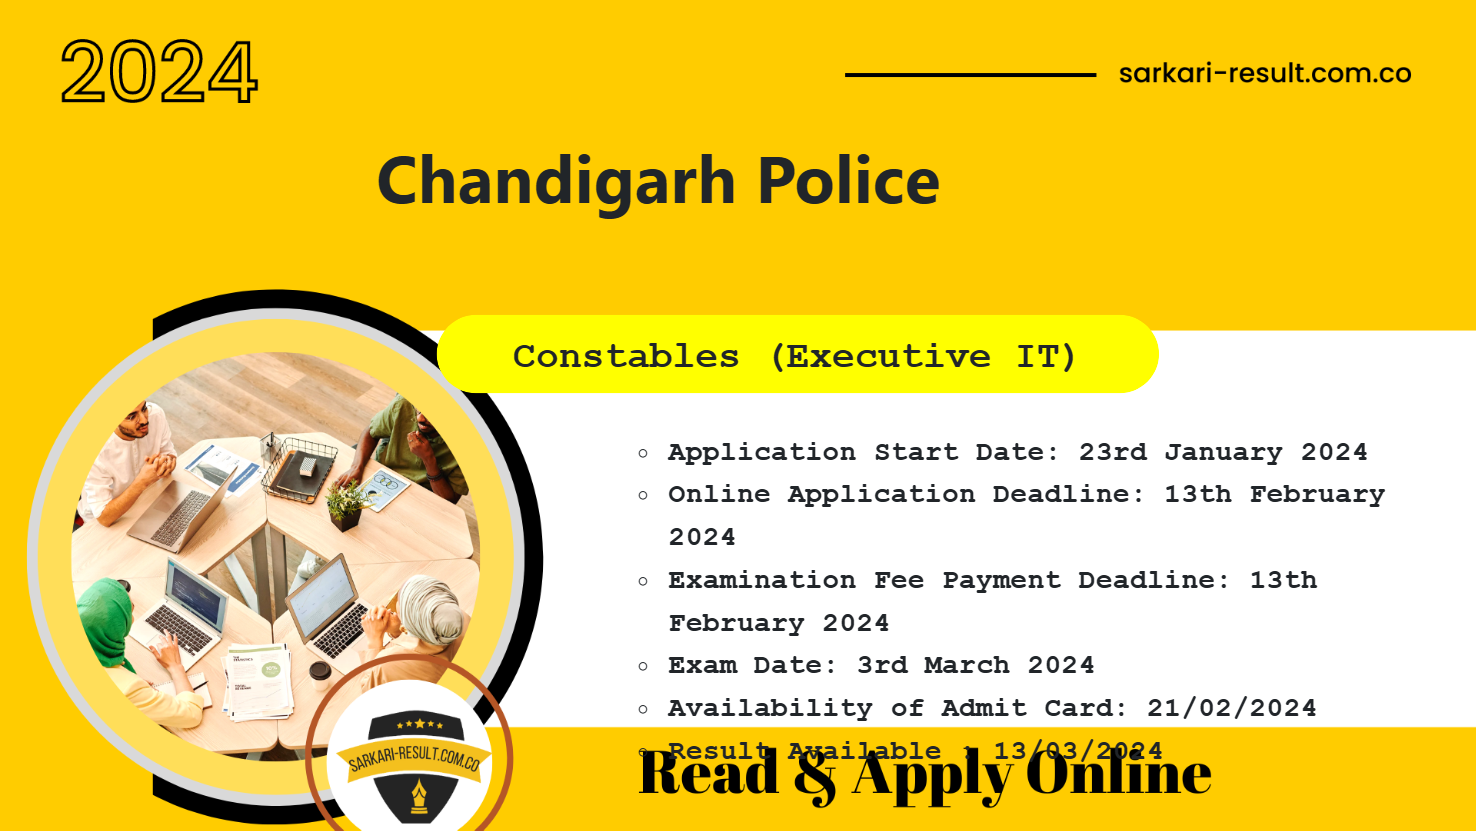 Online application for Chandigarh Police CHD Constable Executive IT Recruitment 2024 for 144 posts.